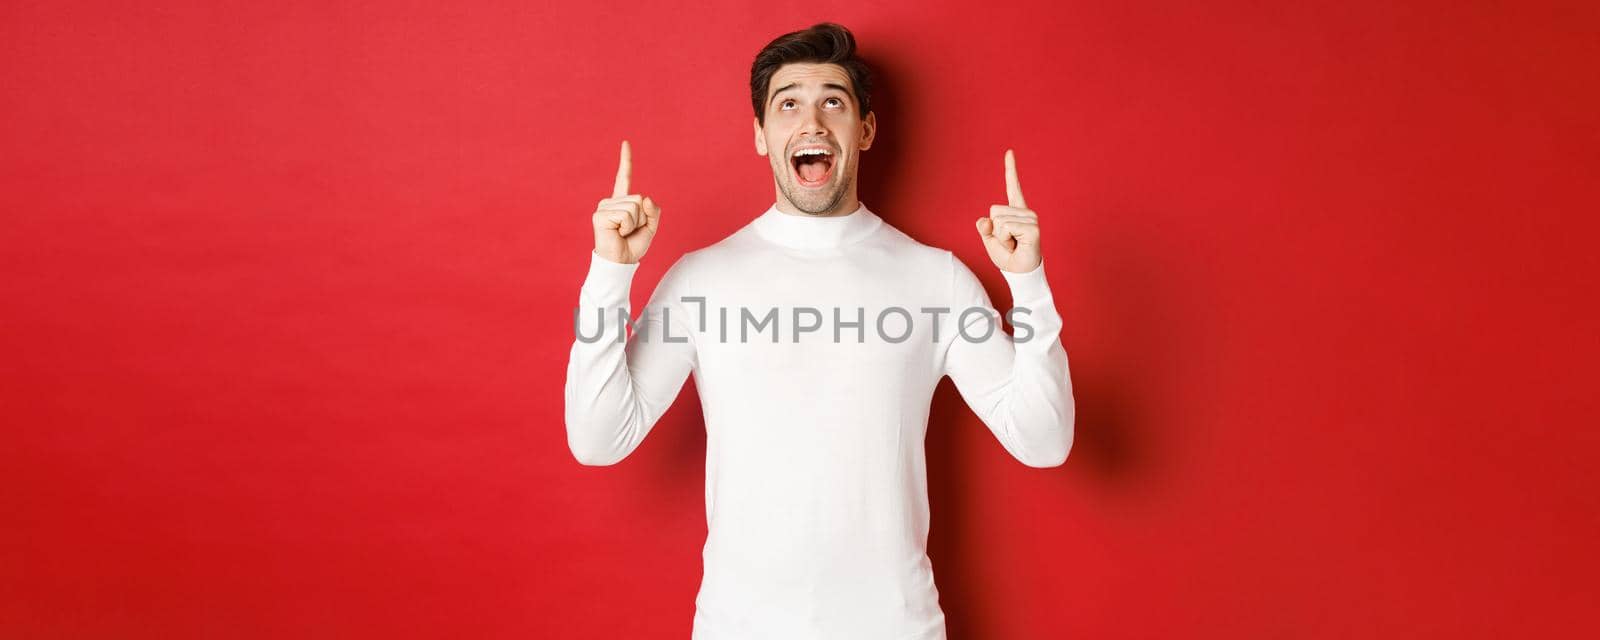 Concept of winter holidays. Image of amazed handsome guy reacting to christmas announcement, pointing and looking up at copy space, standing over red background.